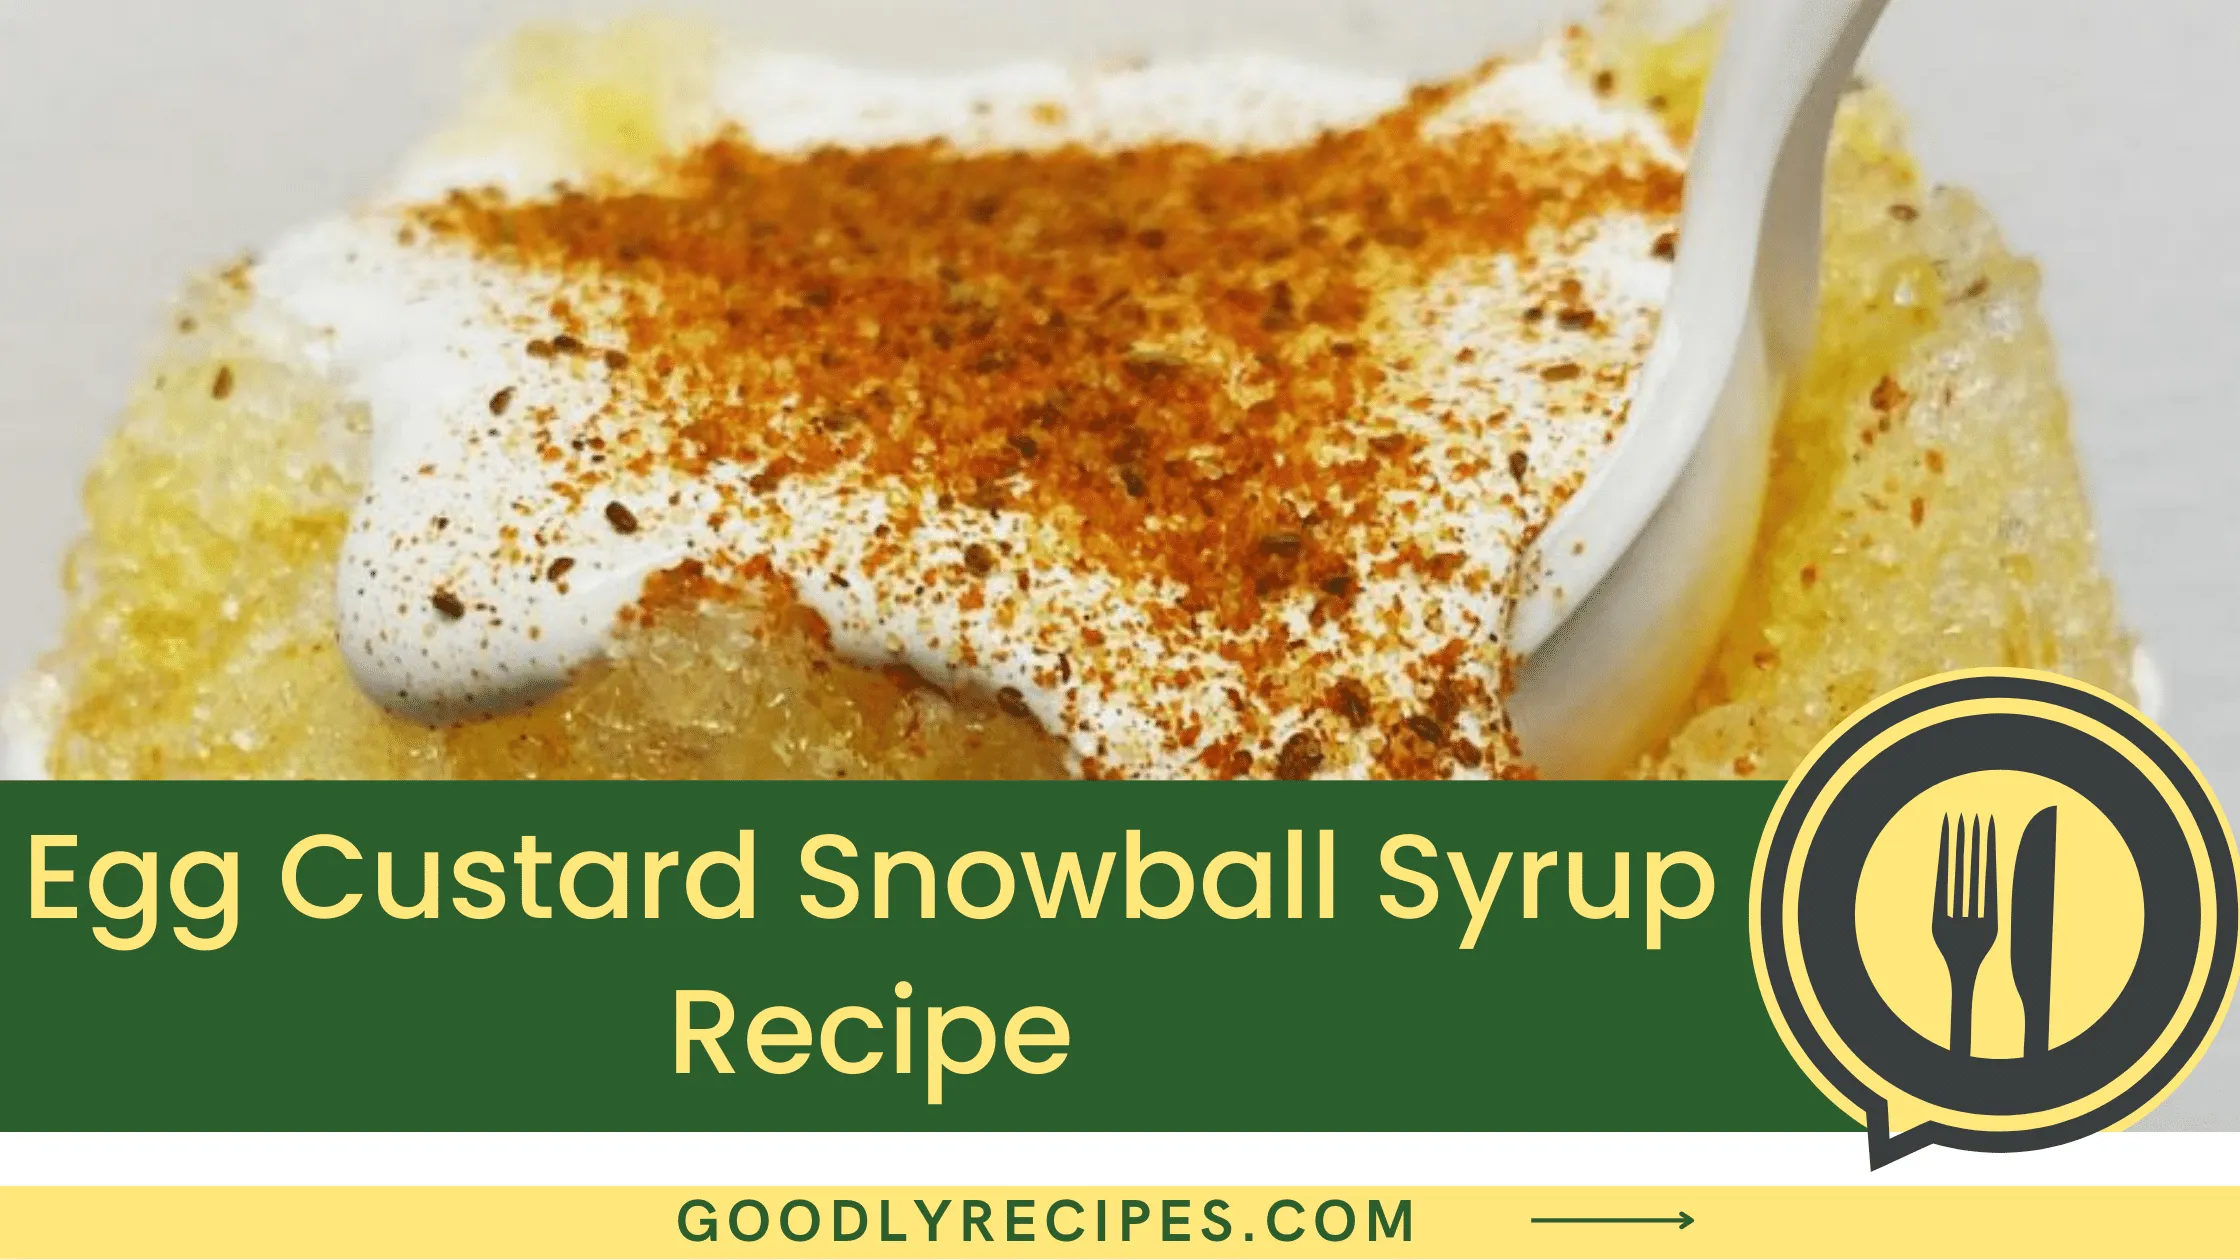 Egg Custard Snowball Syrup Recipe - For Food Lovers